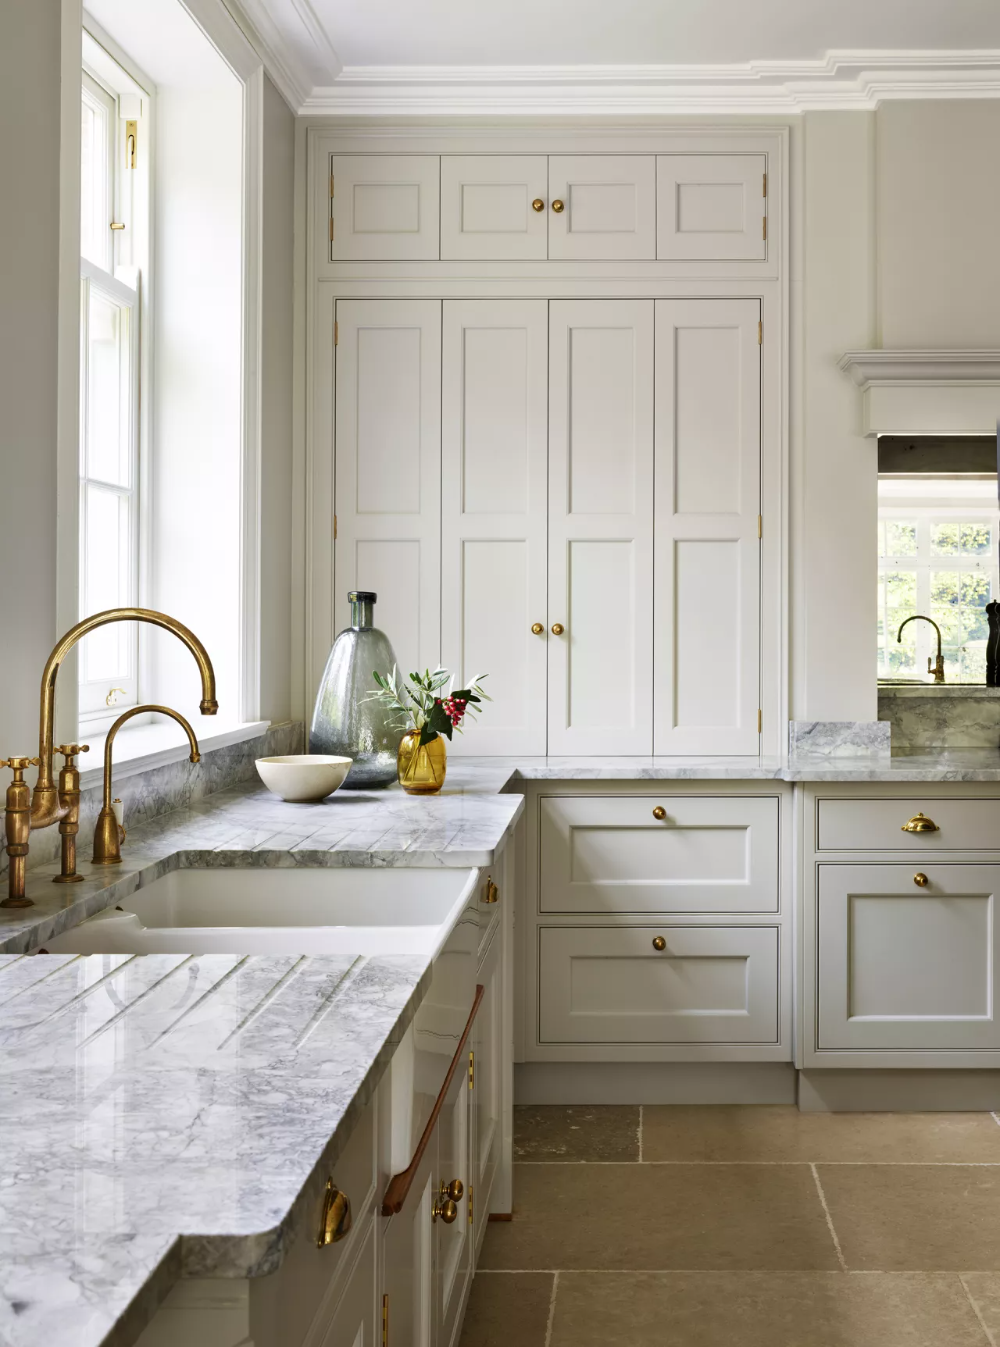 Shaker kitchen ideas – 10 ways to embrace classic simplicity in your home